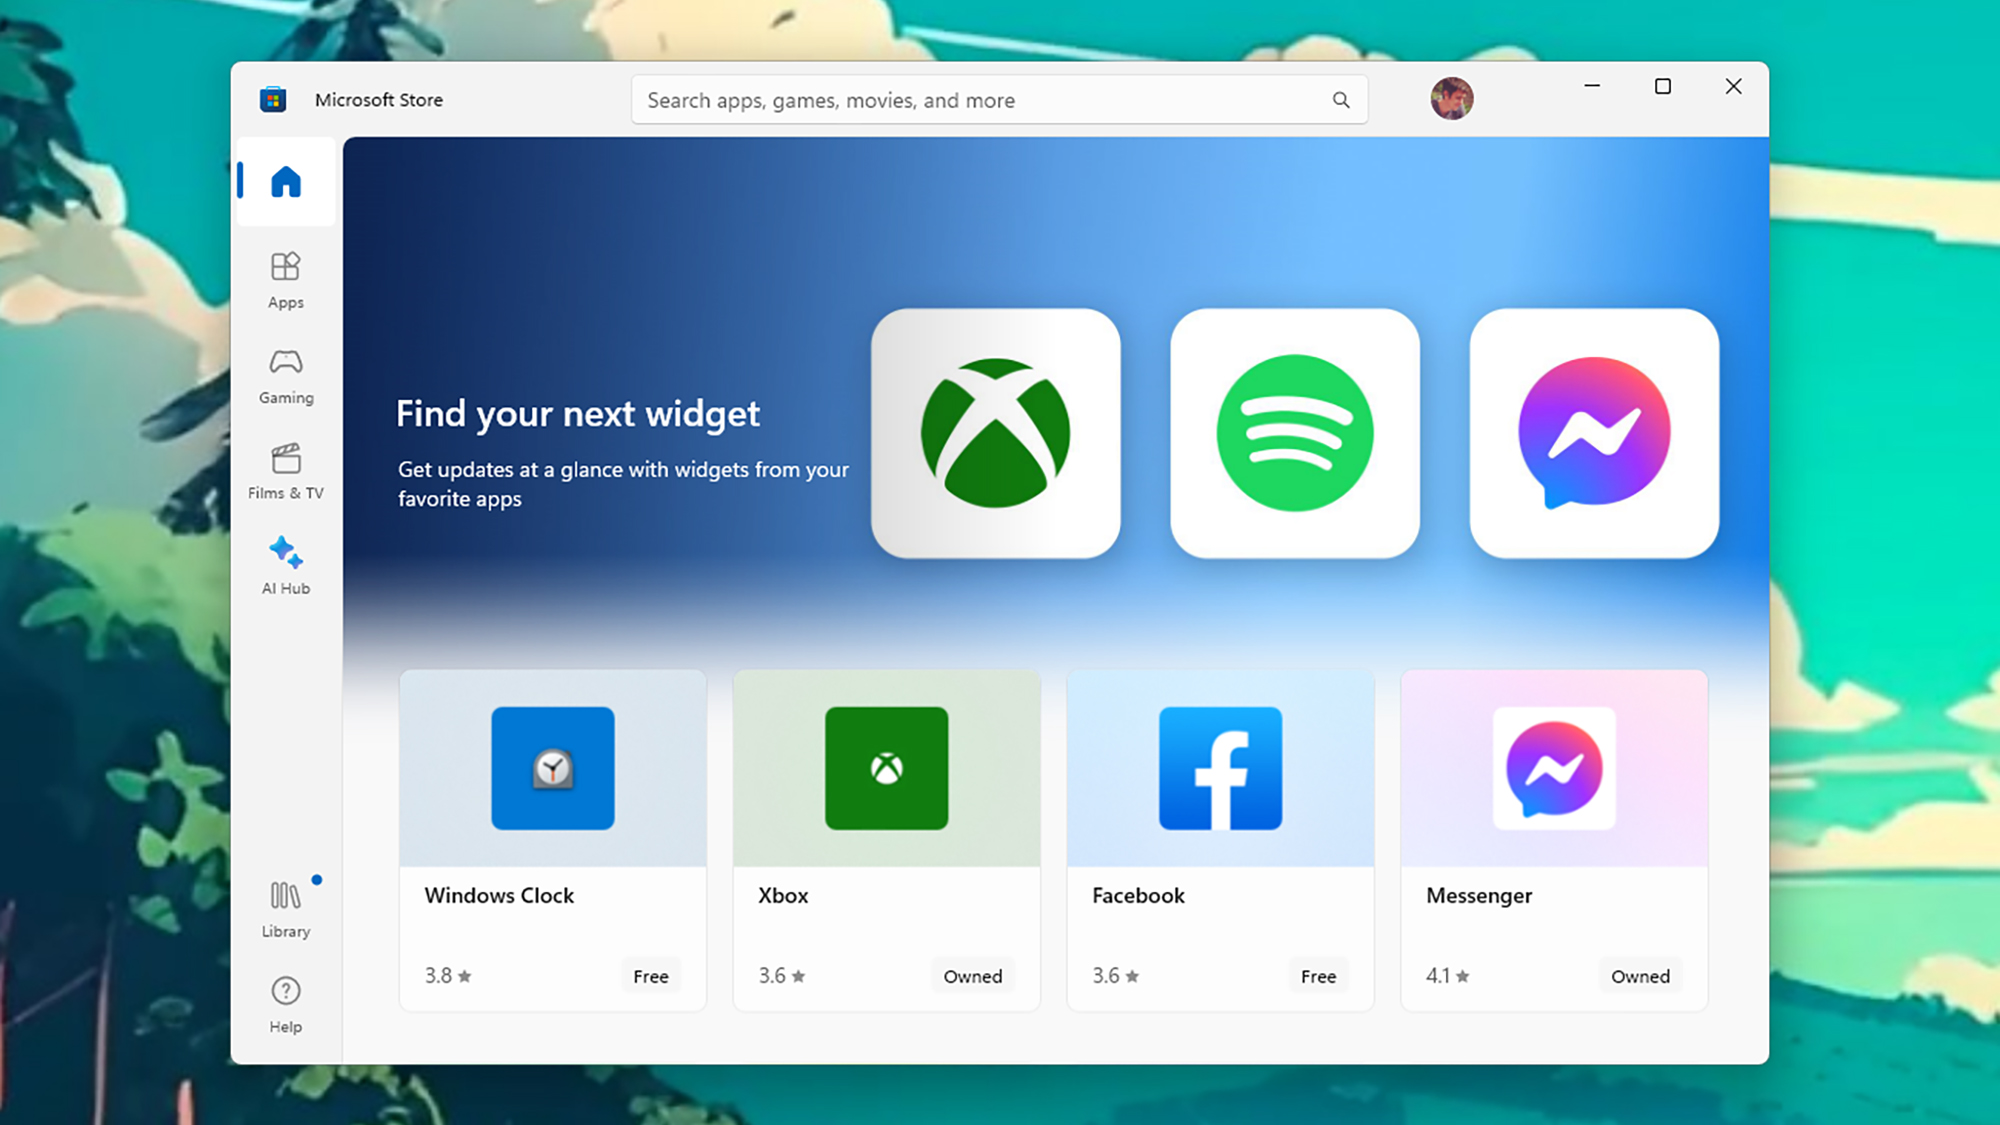 Plenty of widgets are available on the Microsoft Store. Credit: David Nield